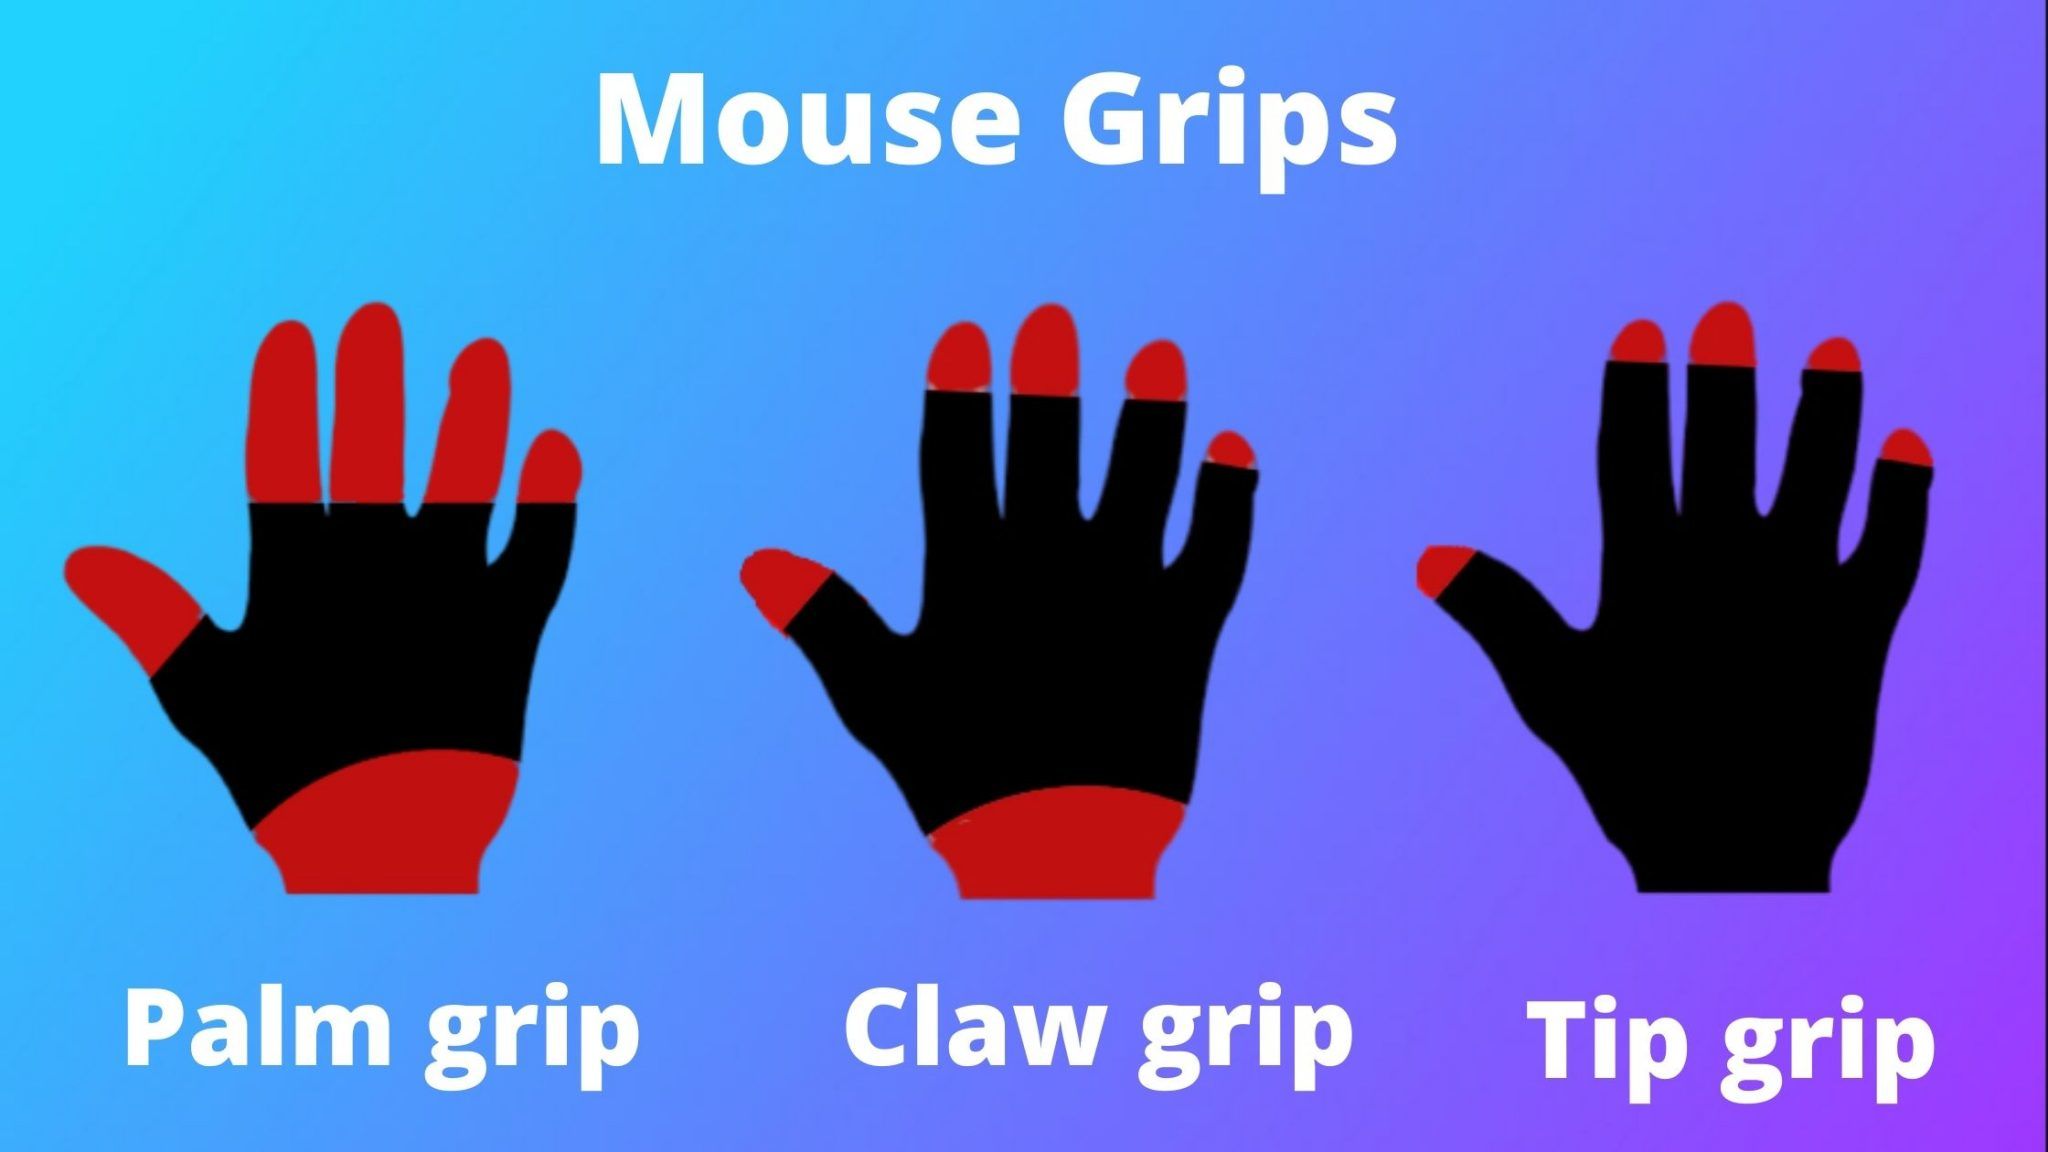 ALL TYPES OF MOUSE GRIPS